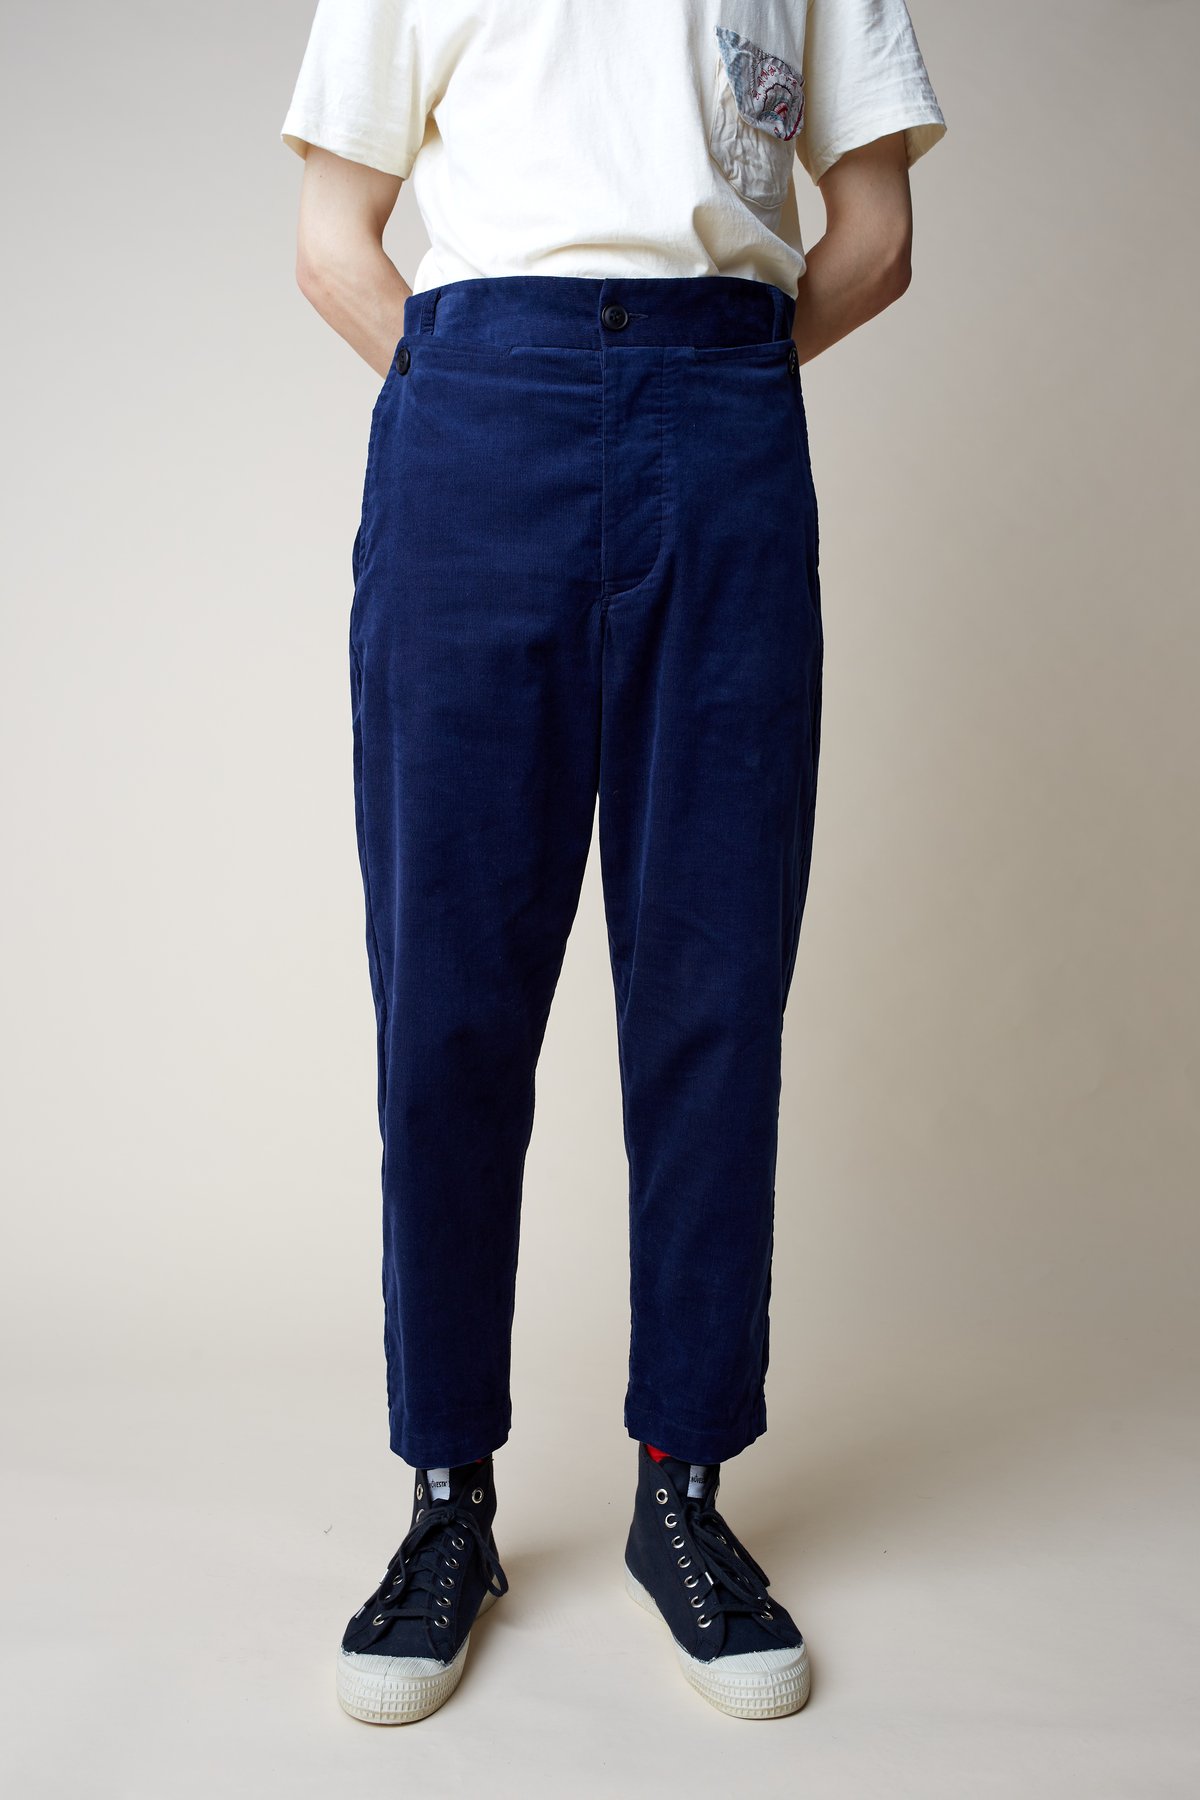 Image of Plangeur Corduroy Trouser - Navy £235.00